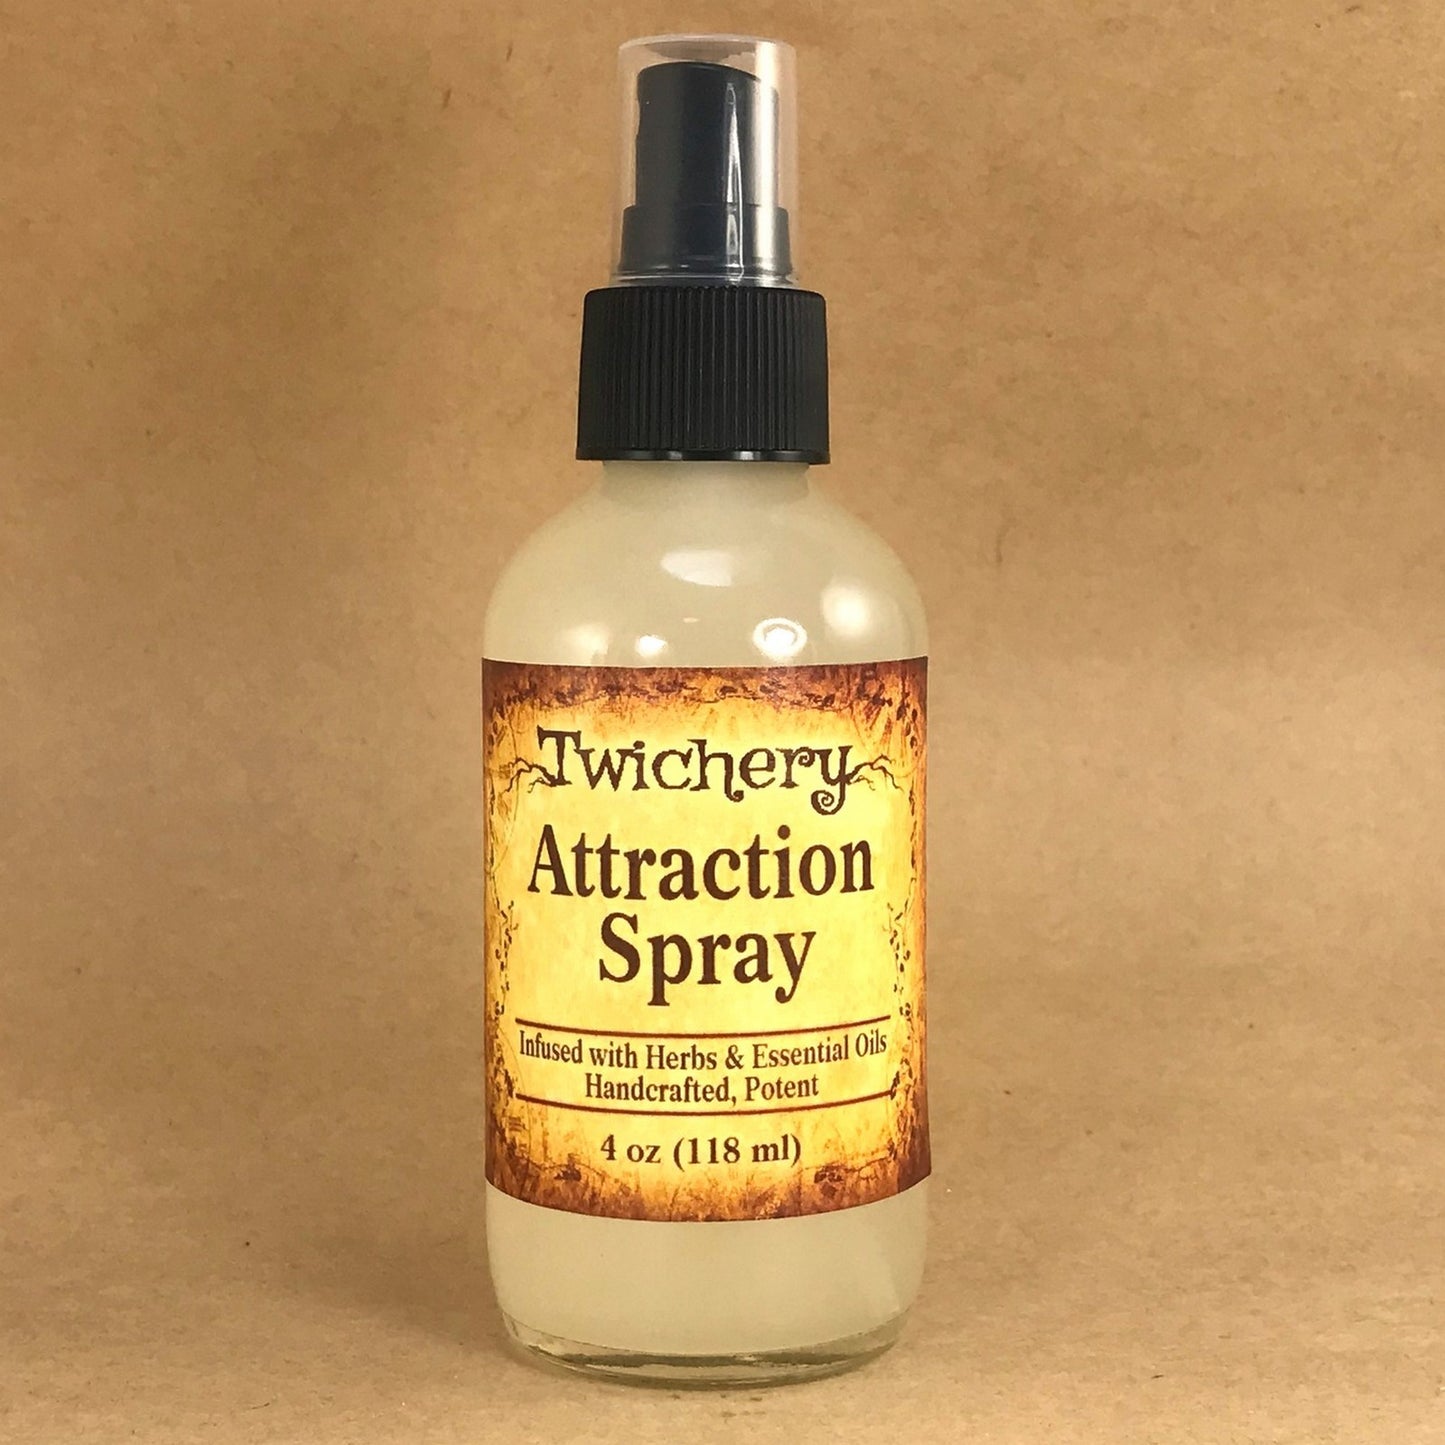 Twichery Attraction Spray 4 ounce: Attract new love, luck, money, new opportunities, Hoodoo, Voodoo, Traditional Witchcraft, Pagan